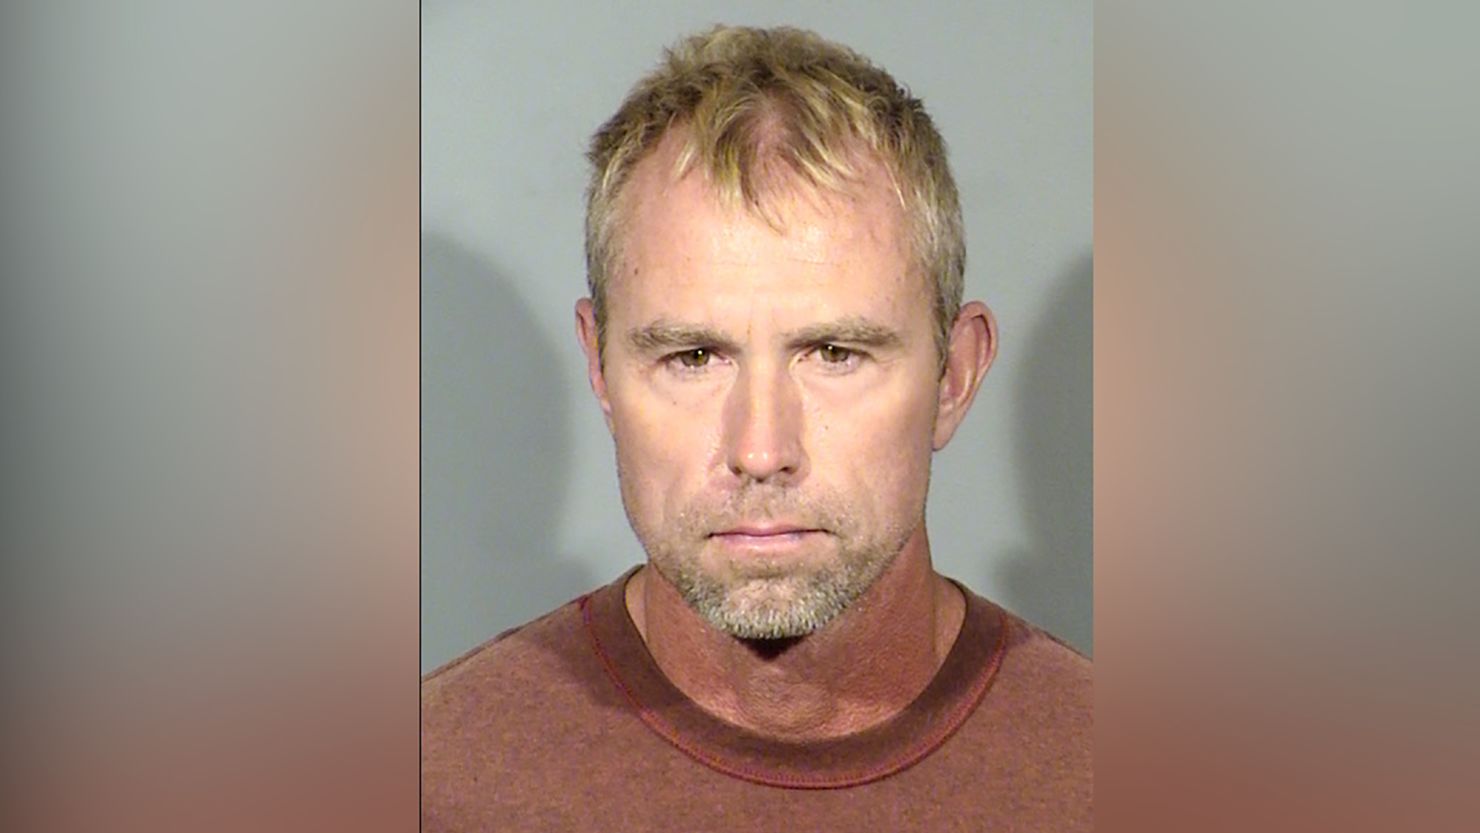 Terry Gray, 52, a former coach charged with 14 counts of lewdness with a child under the age of 14.